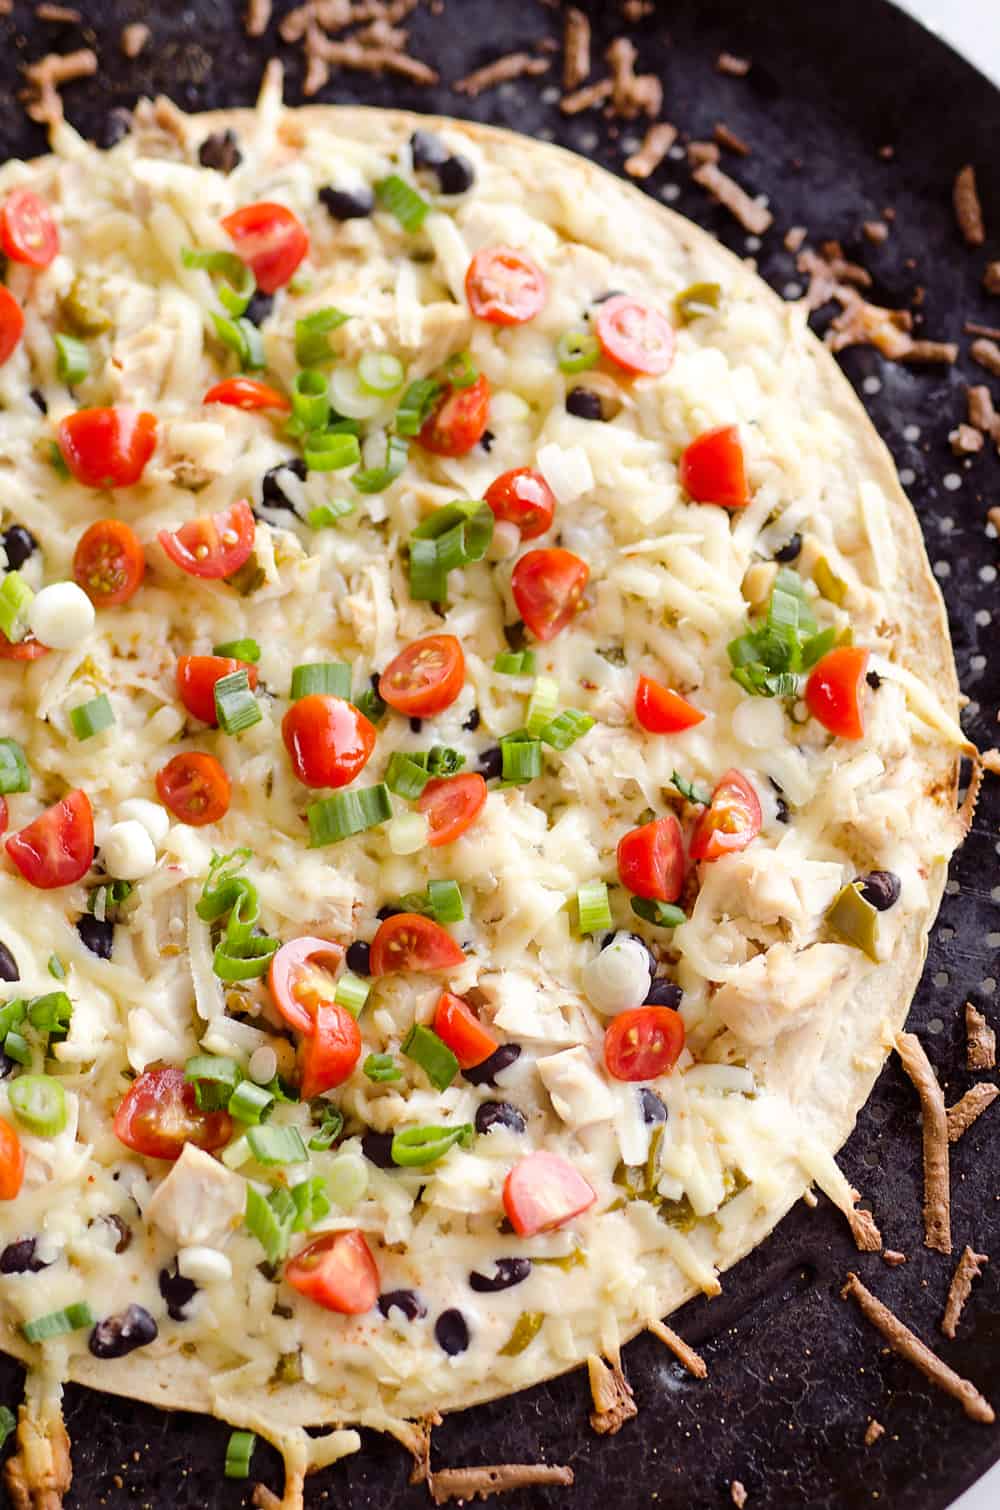 Light & Spicy Southwest Chicken Pizza is an easy recipe bursting with bold and spicy flavors. A thin and crispy crust is topped with shredded chicken, black beans and jalapeños and finished off with pepper jack cheese, fresh tomatoes and green onions for a delicious weeknight dinner idea.